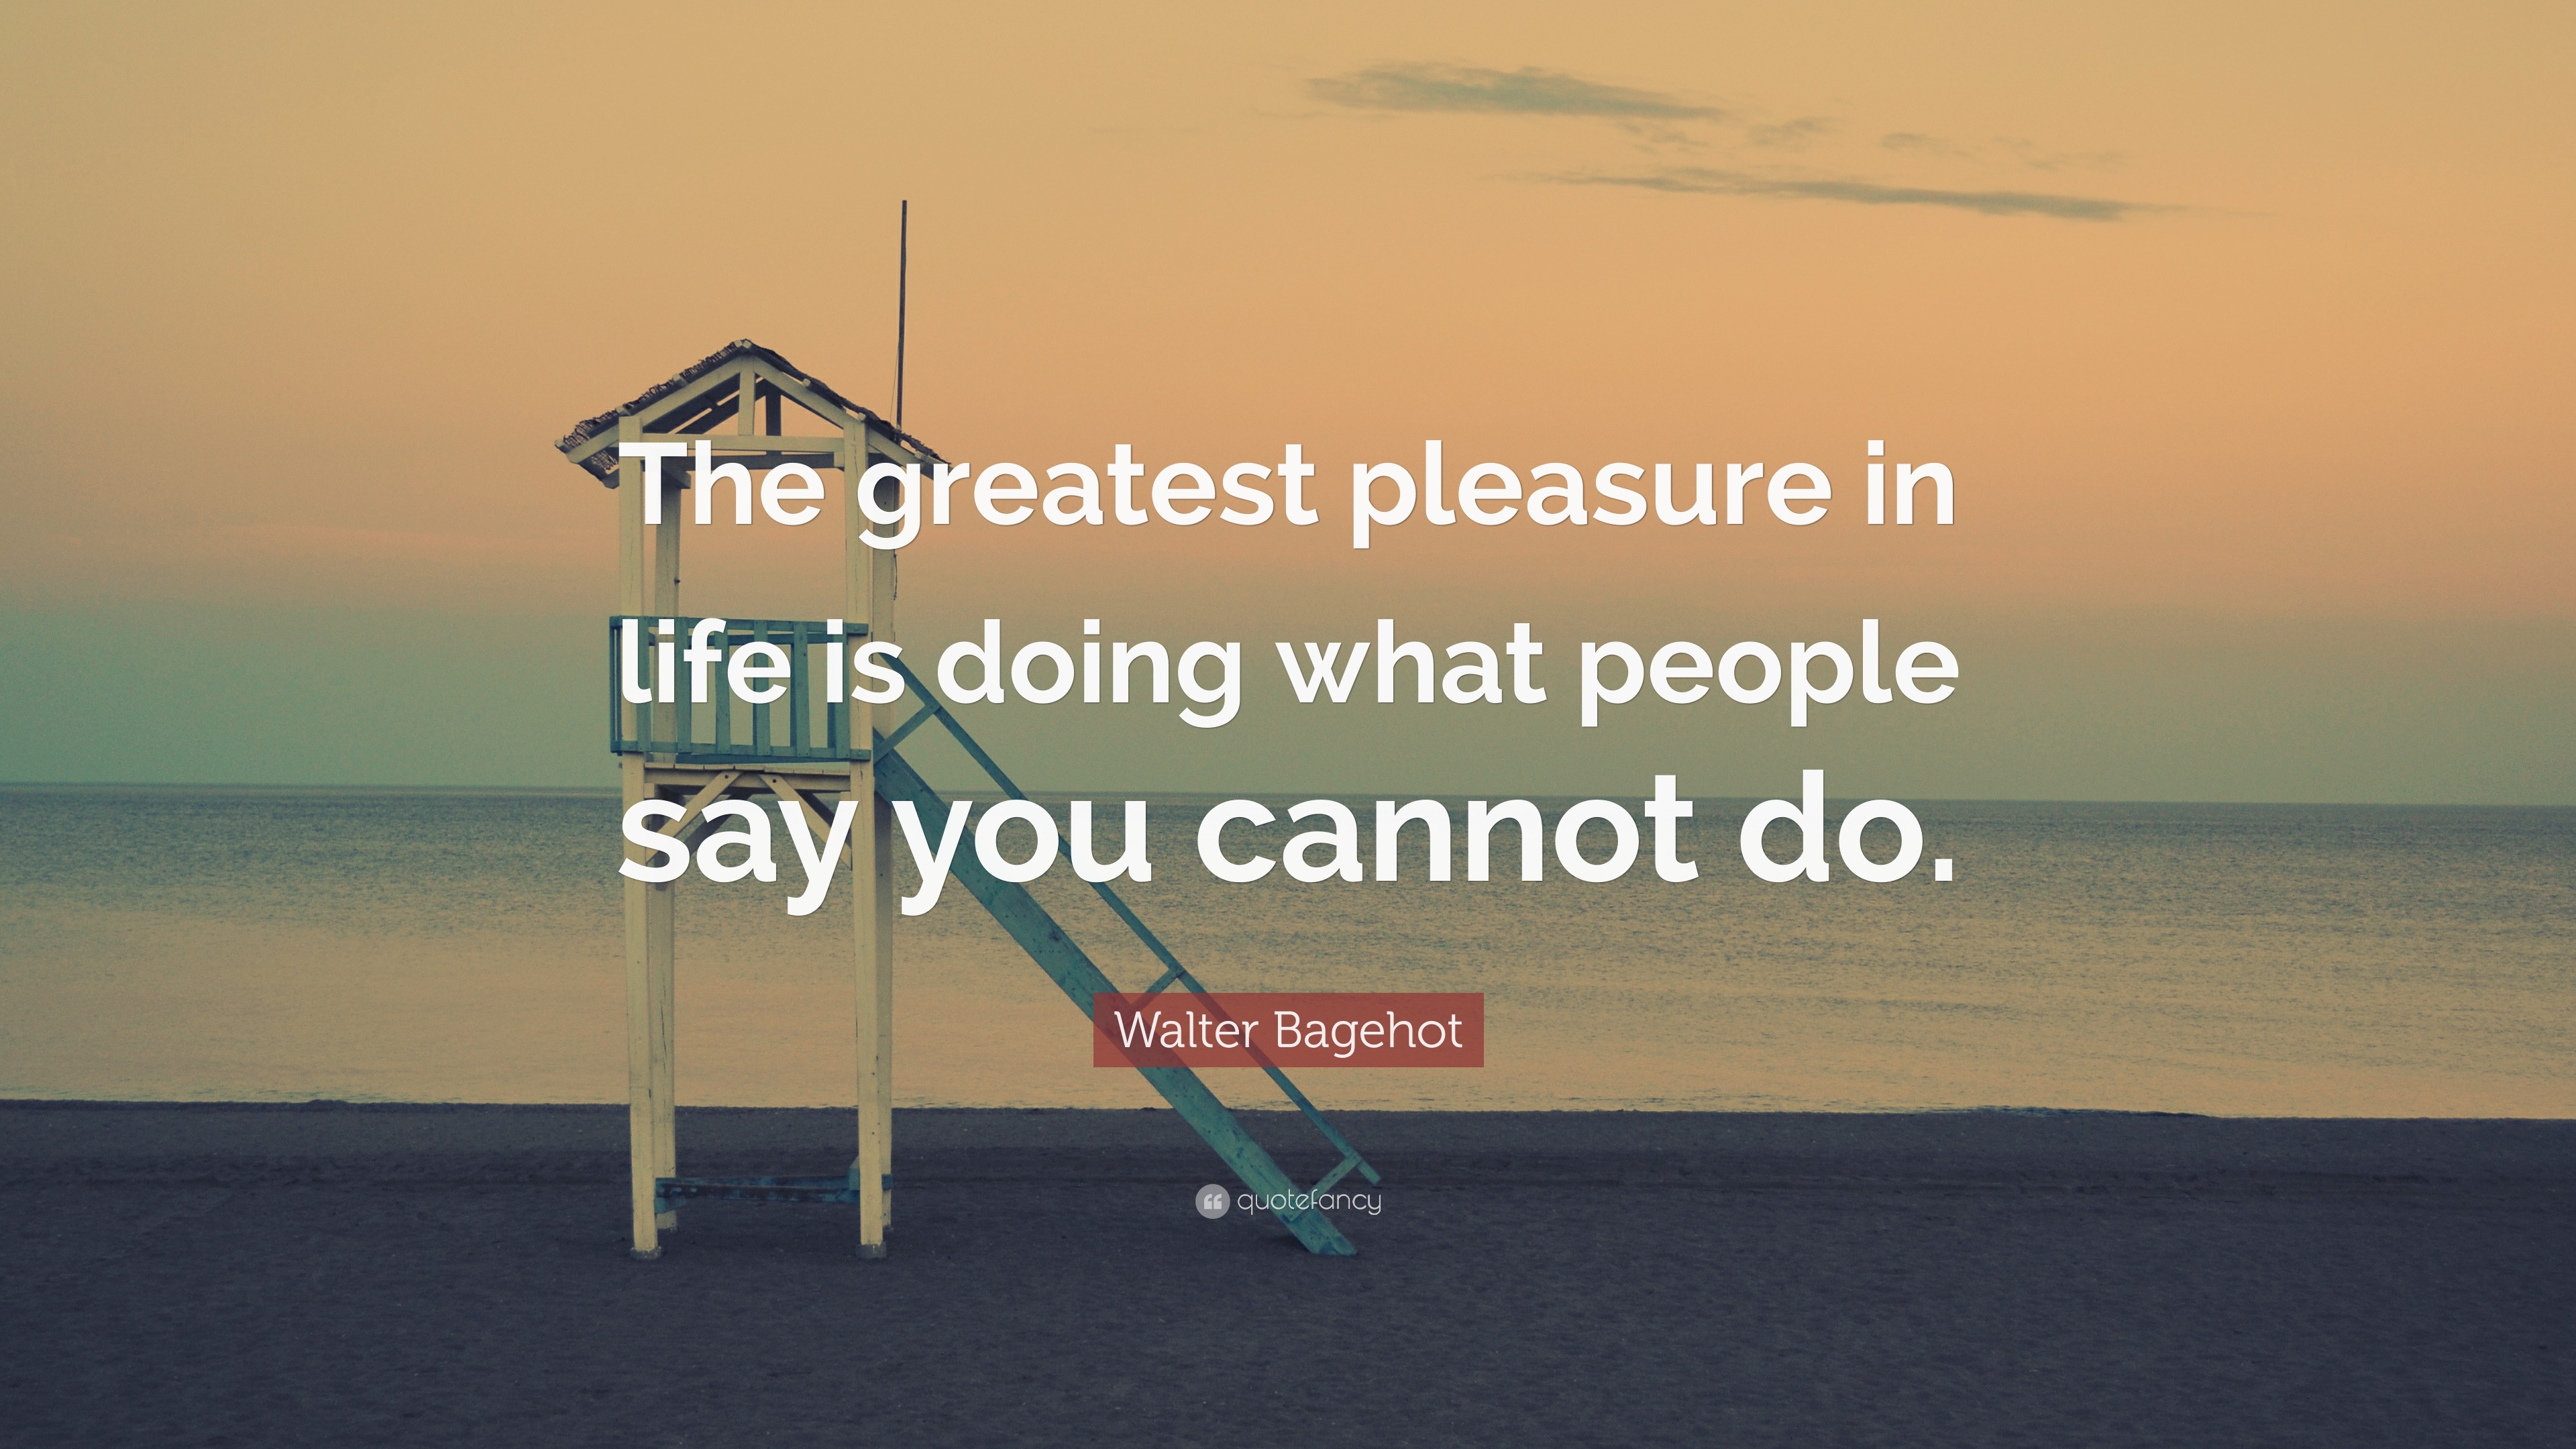 Walter Bagehot Quote “The greatest pleasure in life is doing what people say you